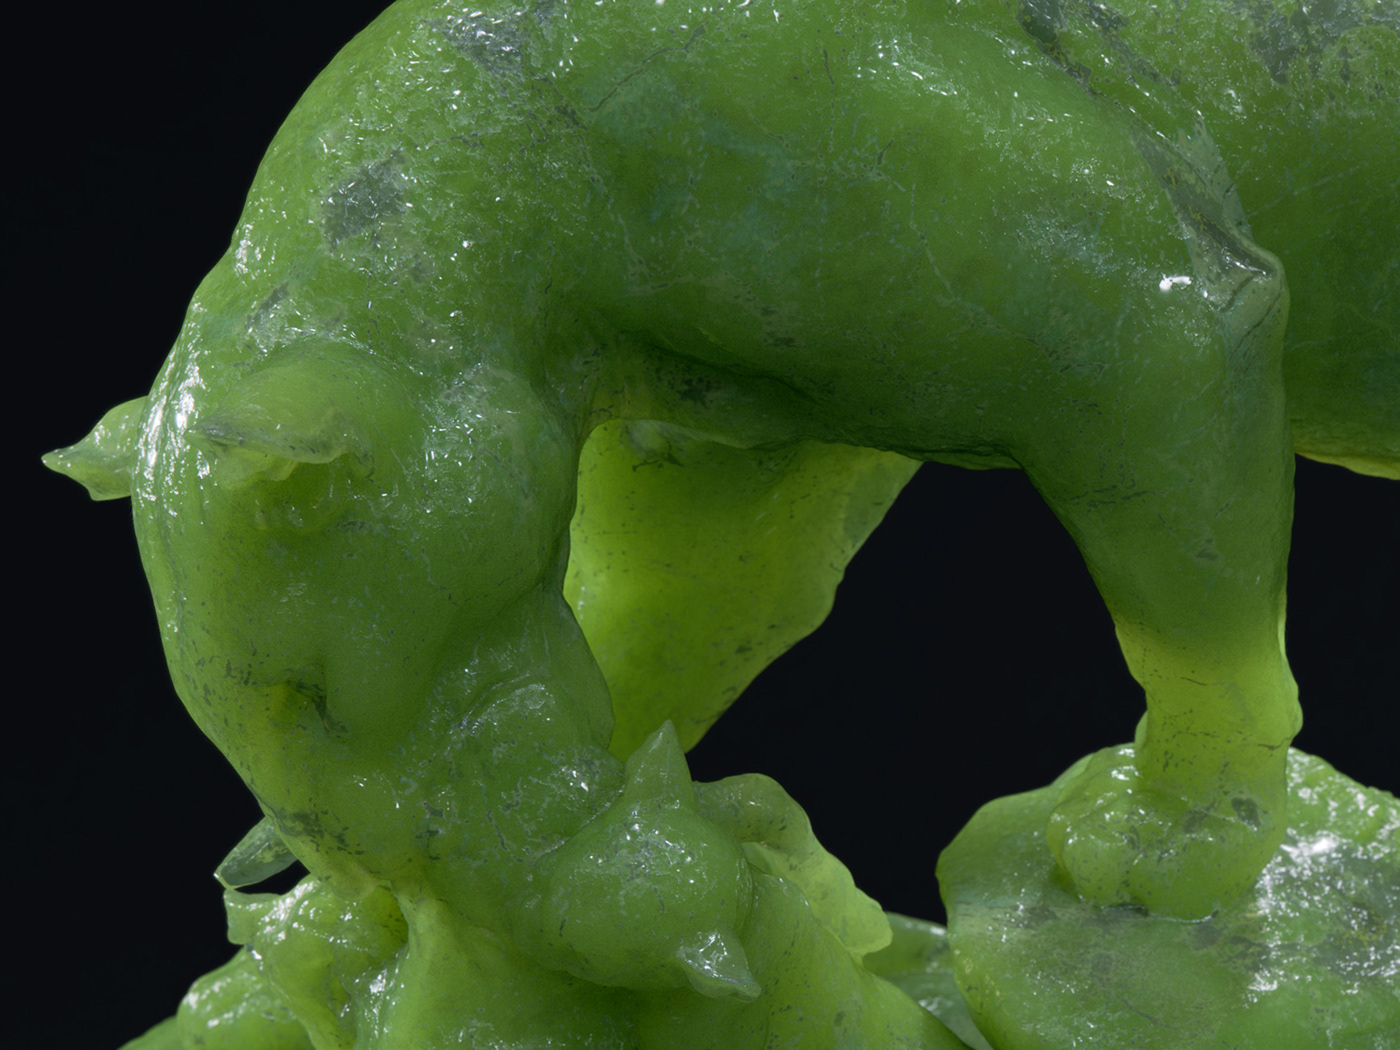 3ds max vray vray next jade CGI panther statue ArionFx photoshop shader